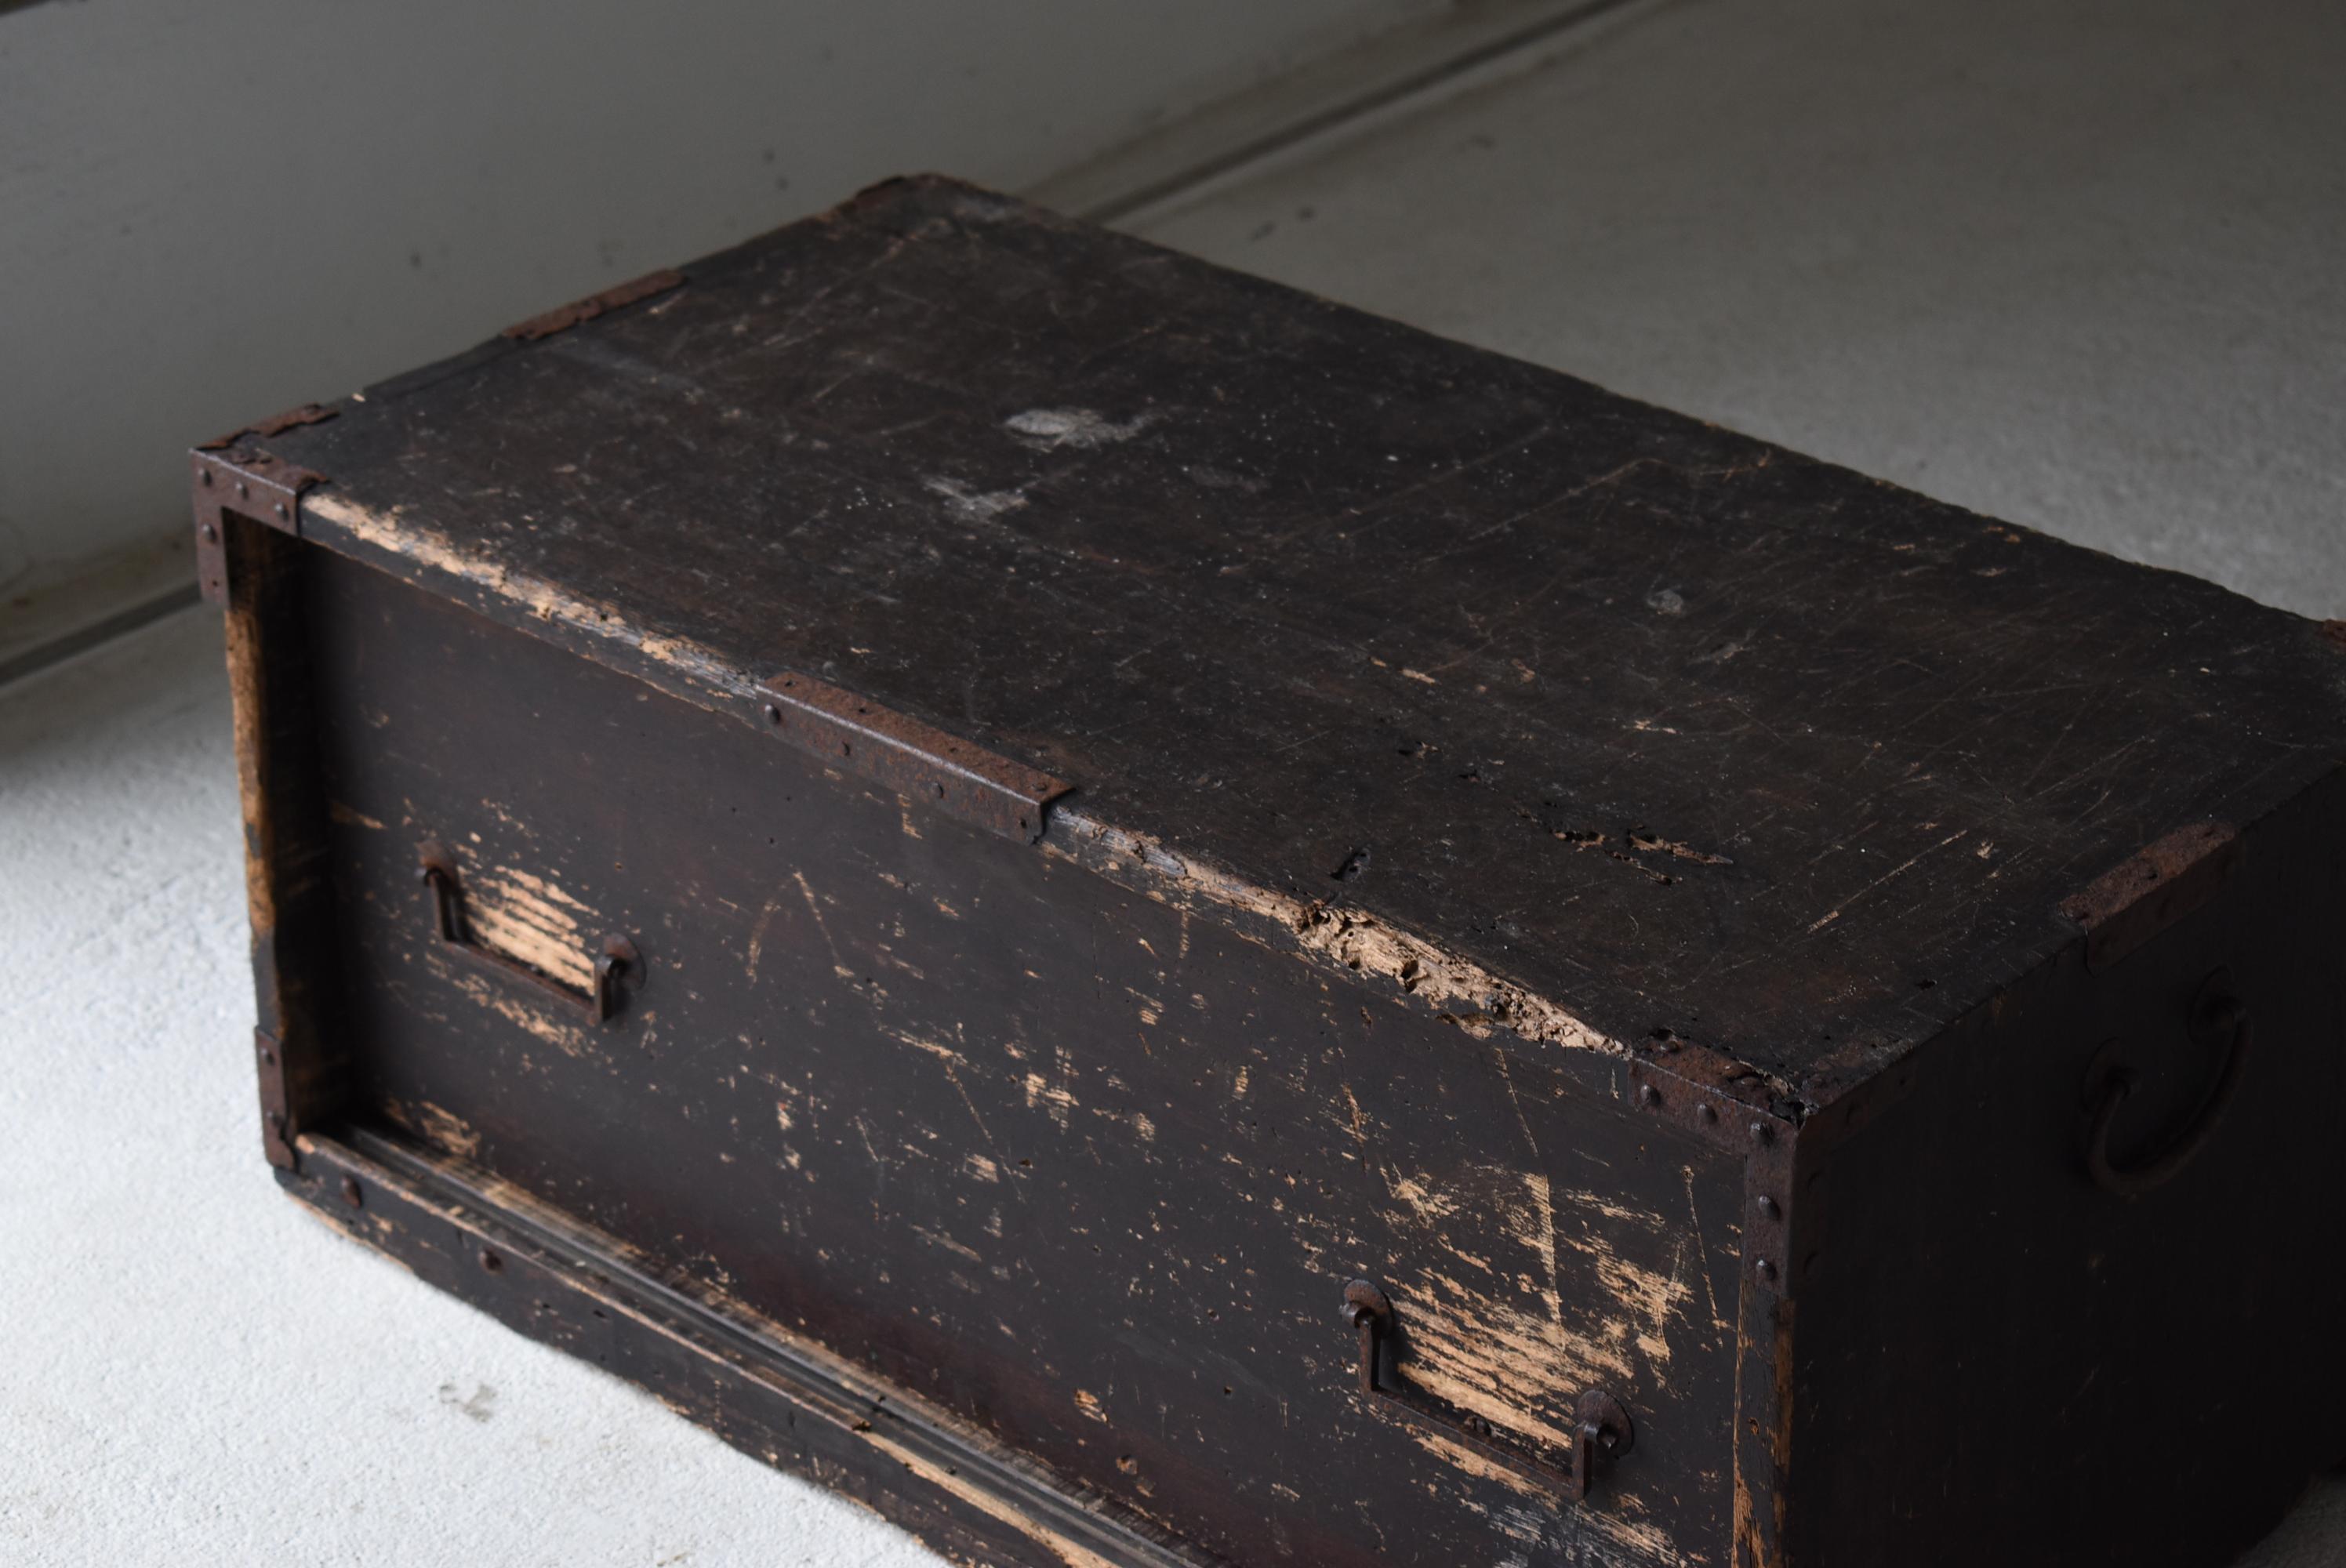 It is an old Japanese drawer.
It is an item from the Edo period. (1800s-1860s)
The materials are paulownia wood and cedar wood.

We use very luxurious materials.
The black color is beautiful and the taste is wonderful.

This shape is a rare